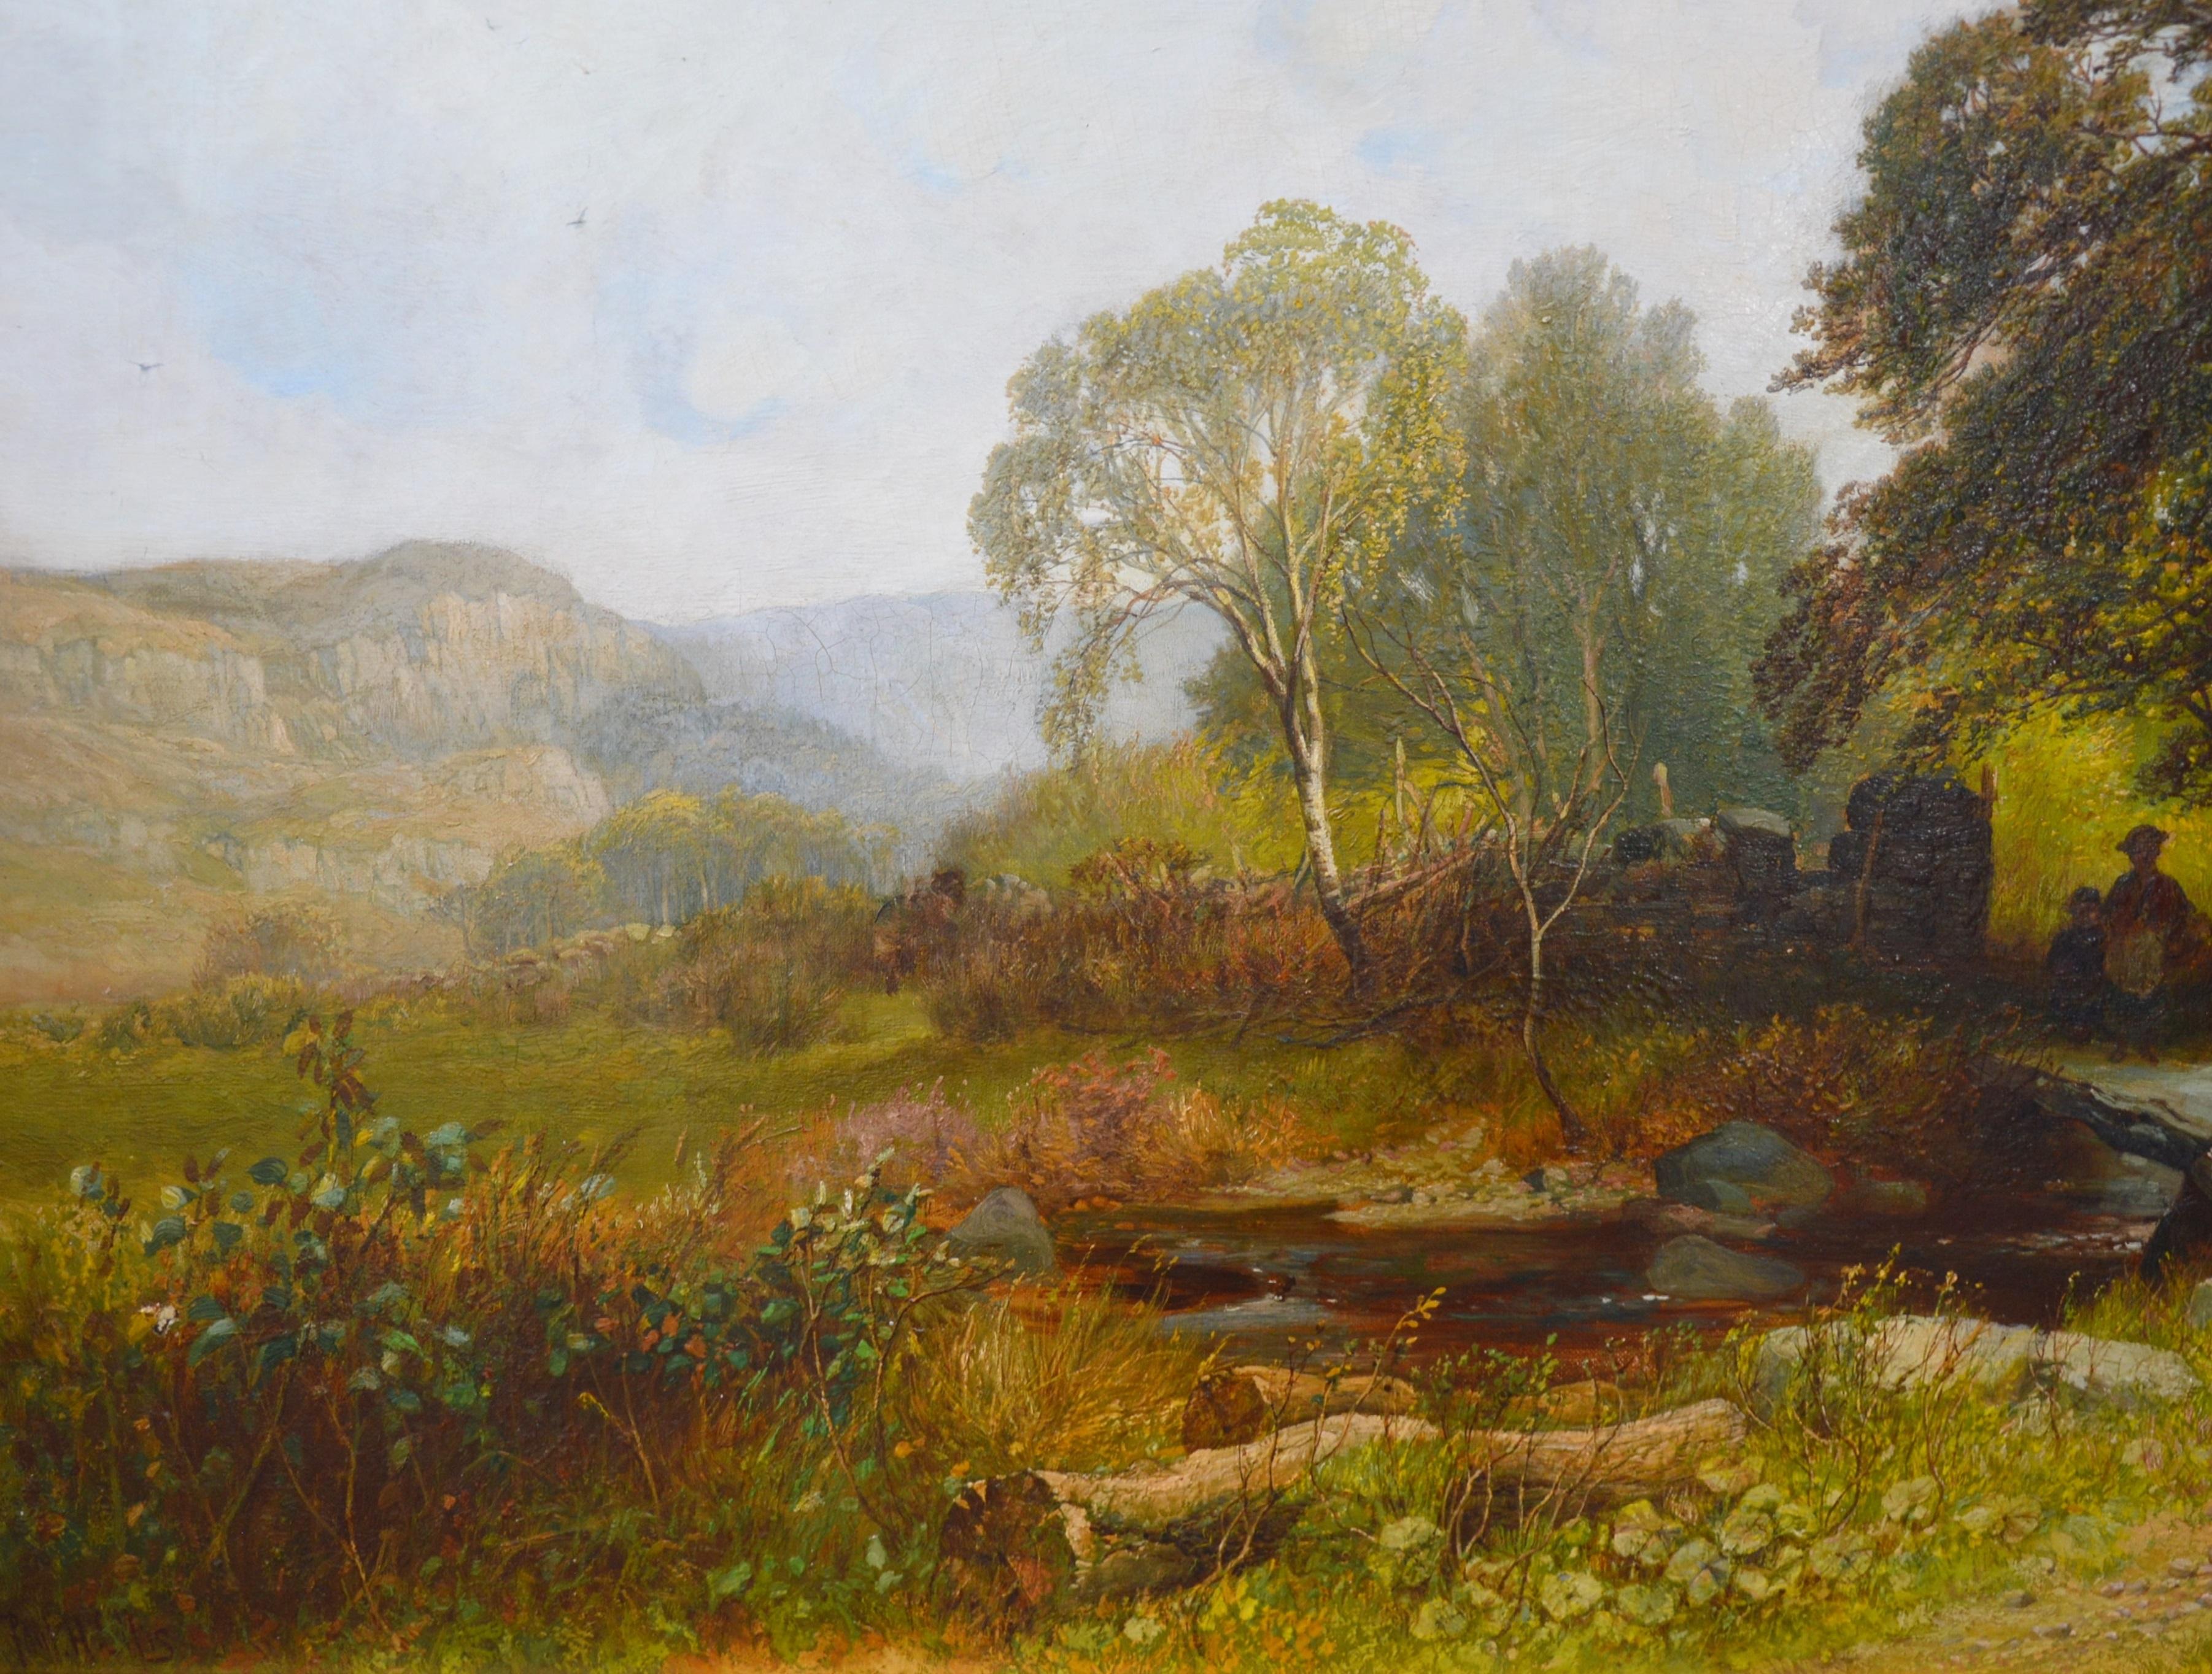 Near Capel Curig, North Wales - 19th Century Landscape Oil Painting  2